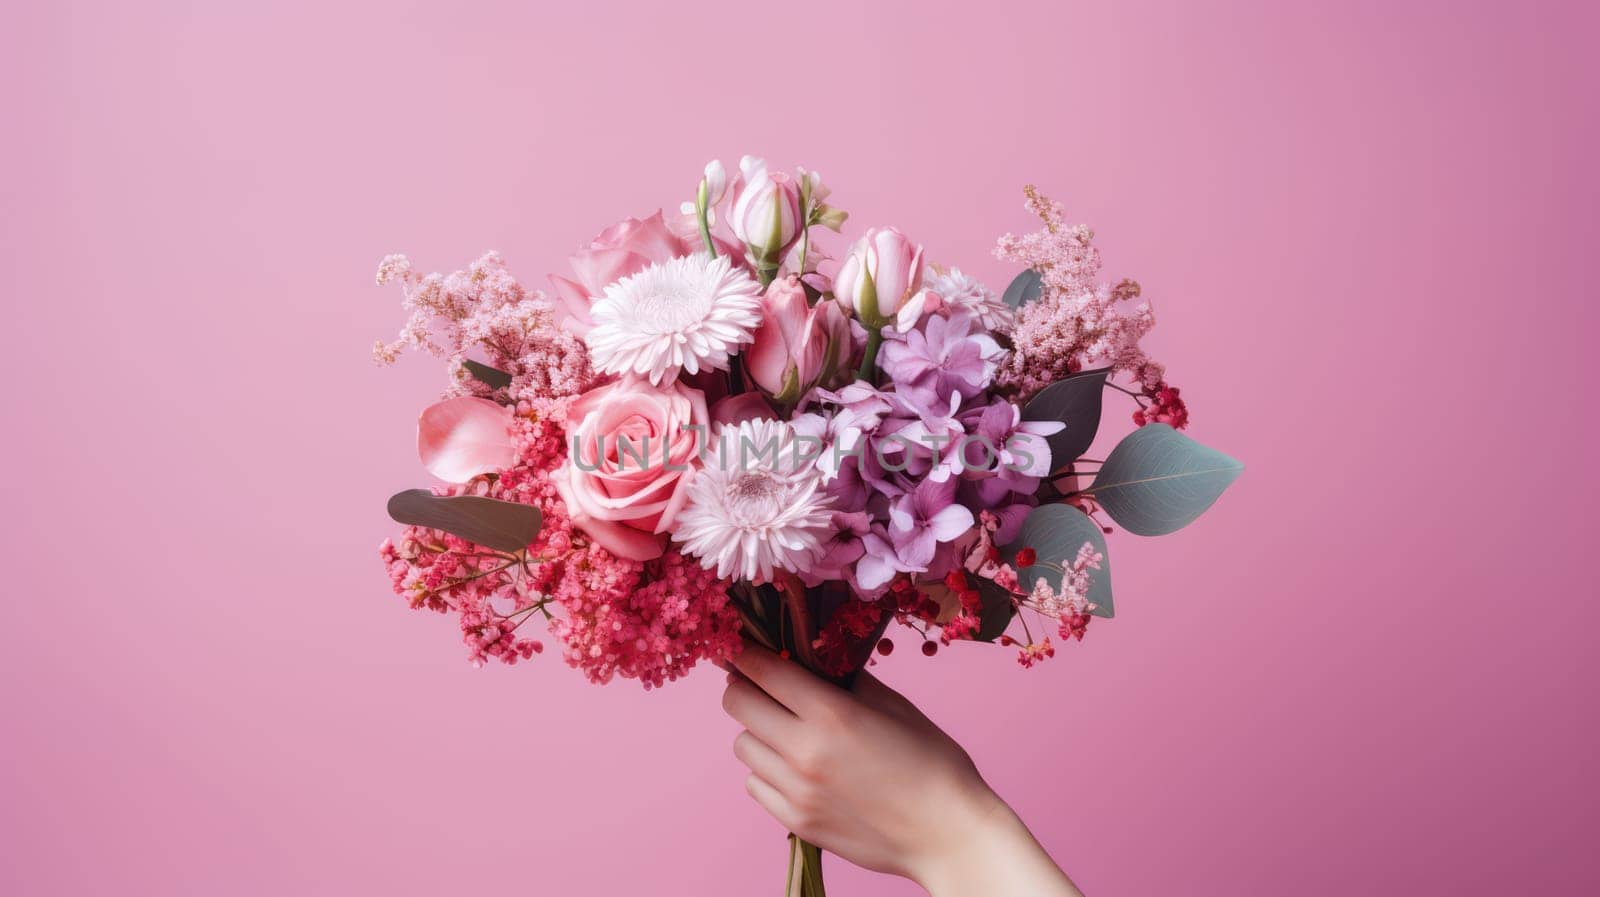 Blooming Beauty: Feminine Elegance and Nature's Delight, a Breathtaking Bouquet of Fresh Pink and White Flowers Held by a Woman, a Perfect Gift for Celebrating Love and Romance on a Spring Holiday, Expertly Arranged by a Skilled Florist against a Lush Green Background.